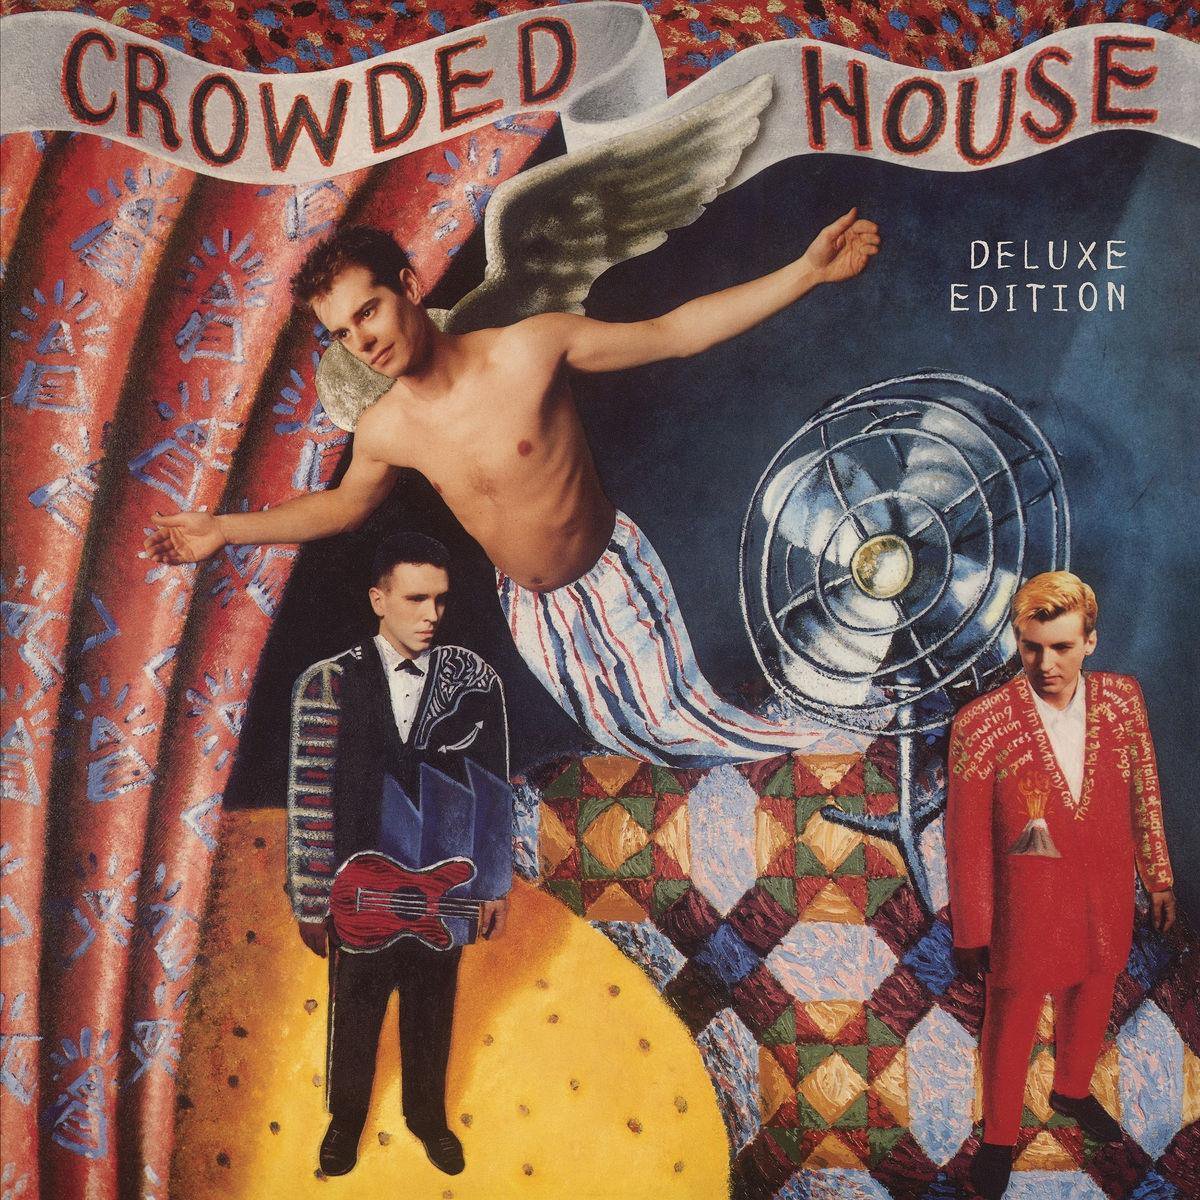 Crowded House Deluxe Edition), Crowded House CD (album